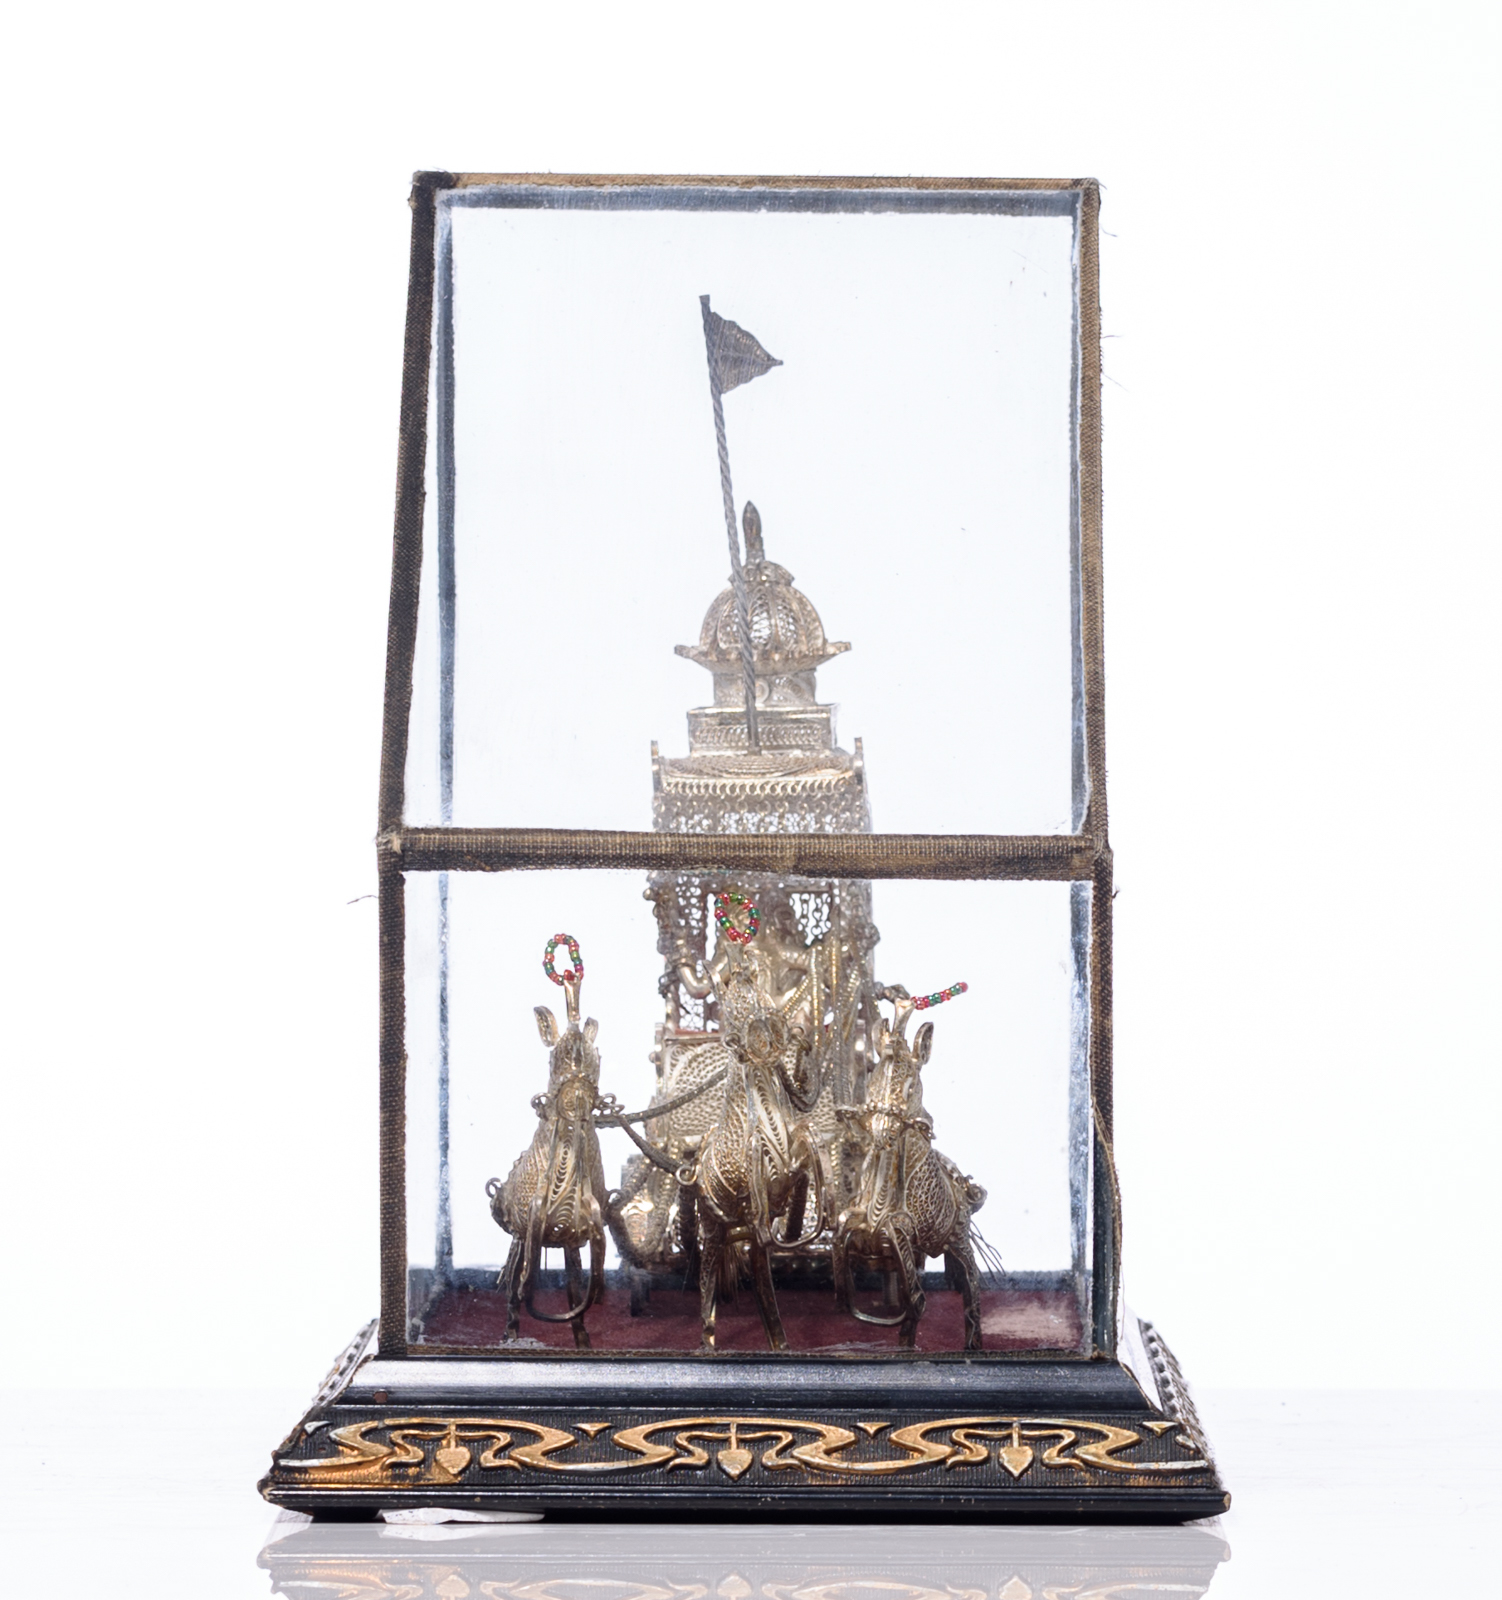 An Oriental silver filigree horse-drawn carriage, in a glass case with an Art Nouveau decorated base - Image 5 of 7